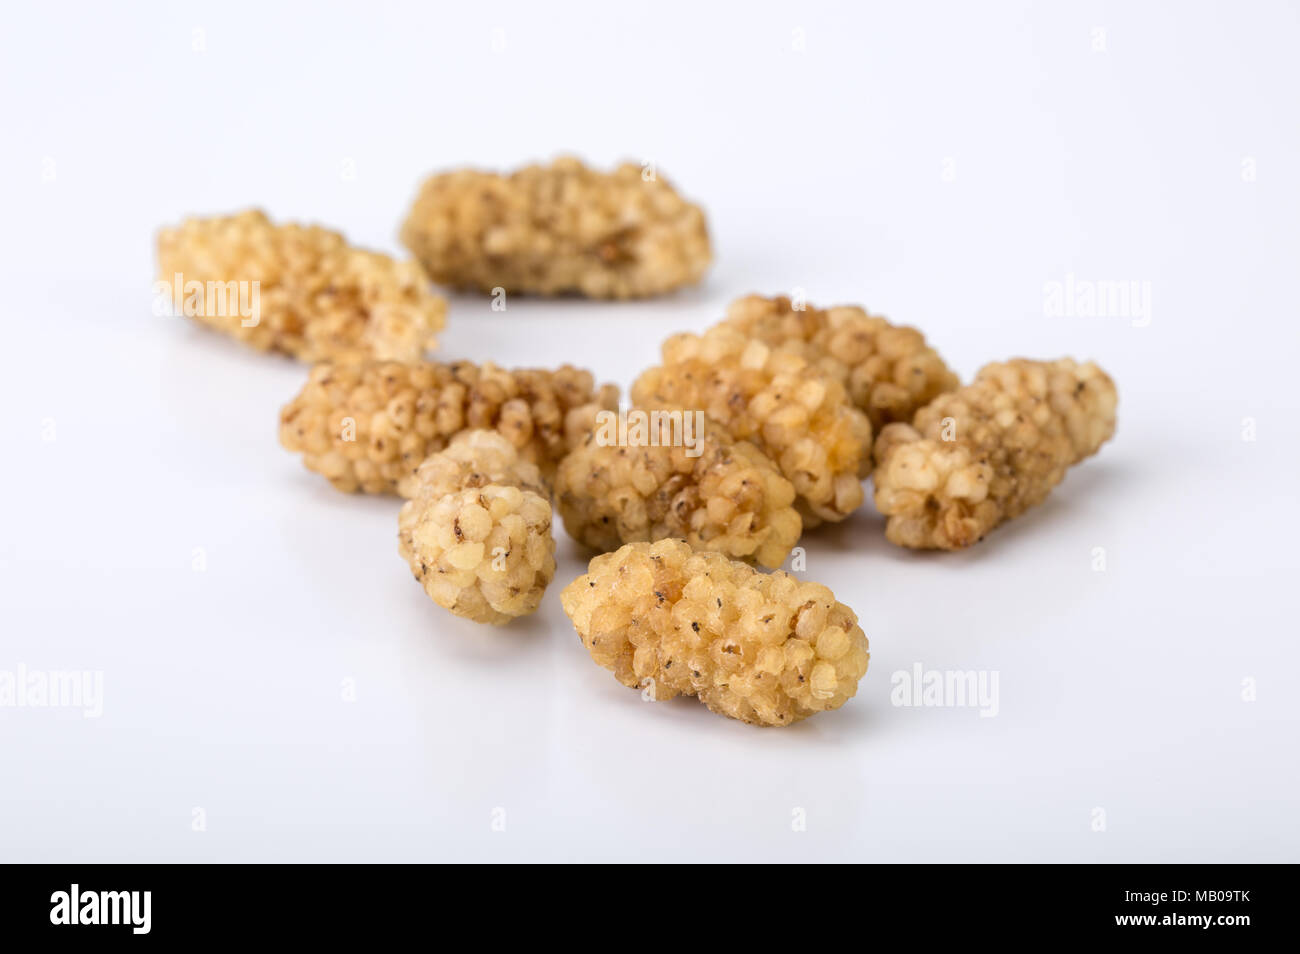 Close Up Shot Of Dried White Mulberries Fruits Isolated On White Background, A Healthy And Popular Sweet Snacks In Iran And Turkey Stock Photo